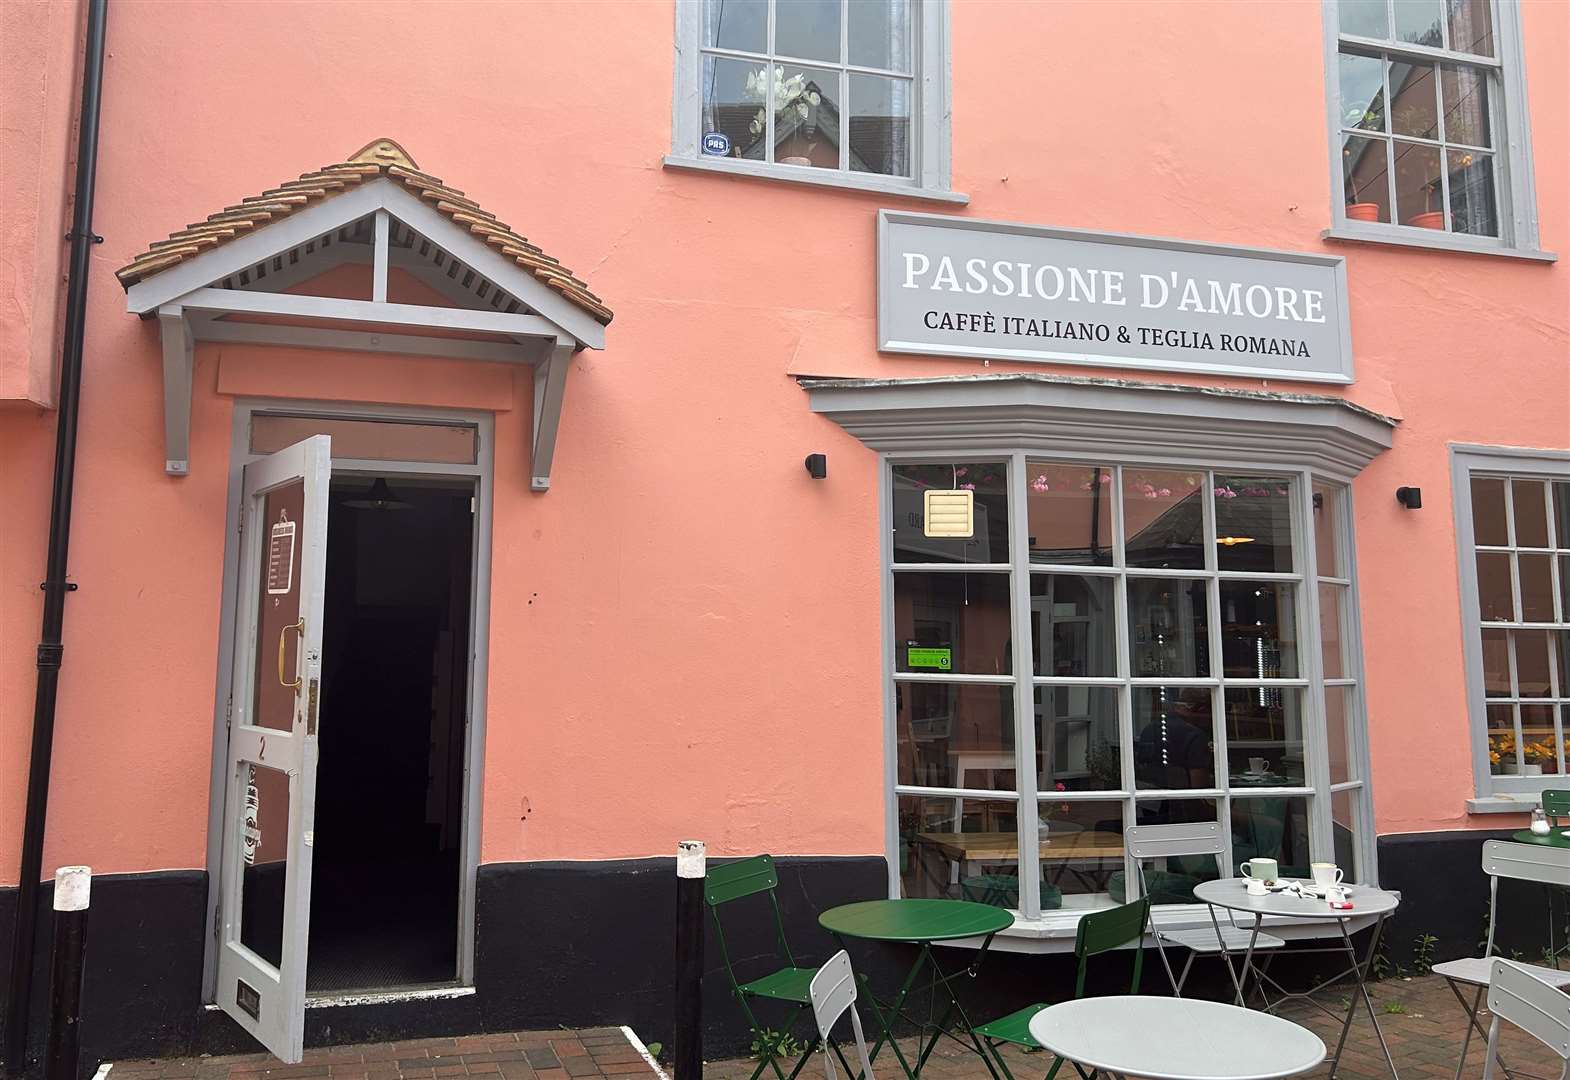 Passione D’Amore has proven popular with customers. Picture: SuffolkNews